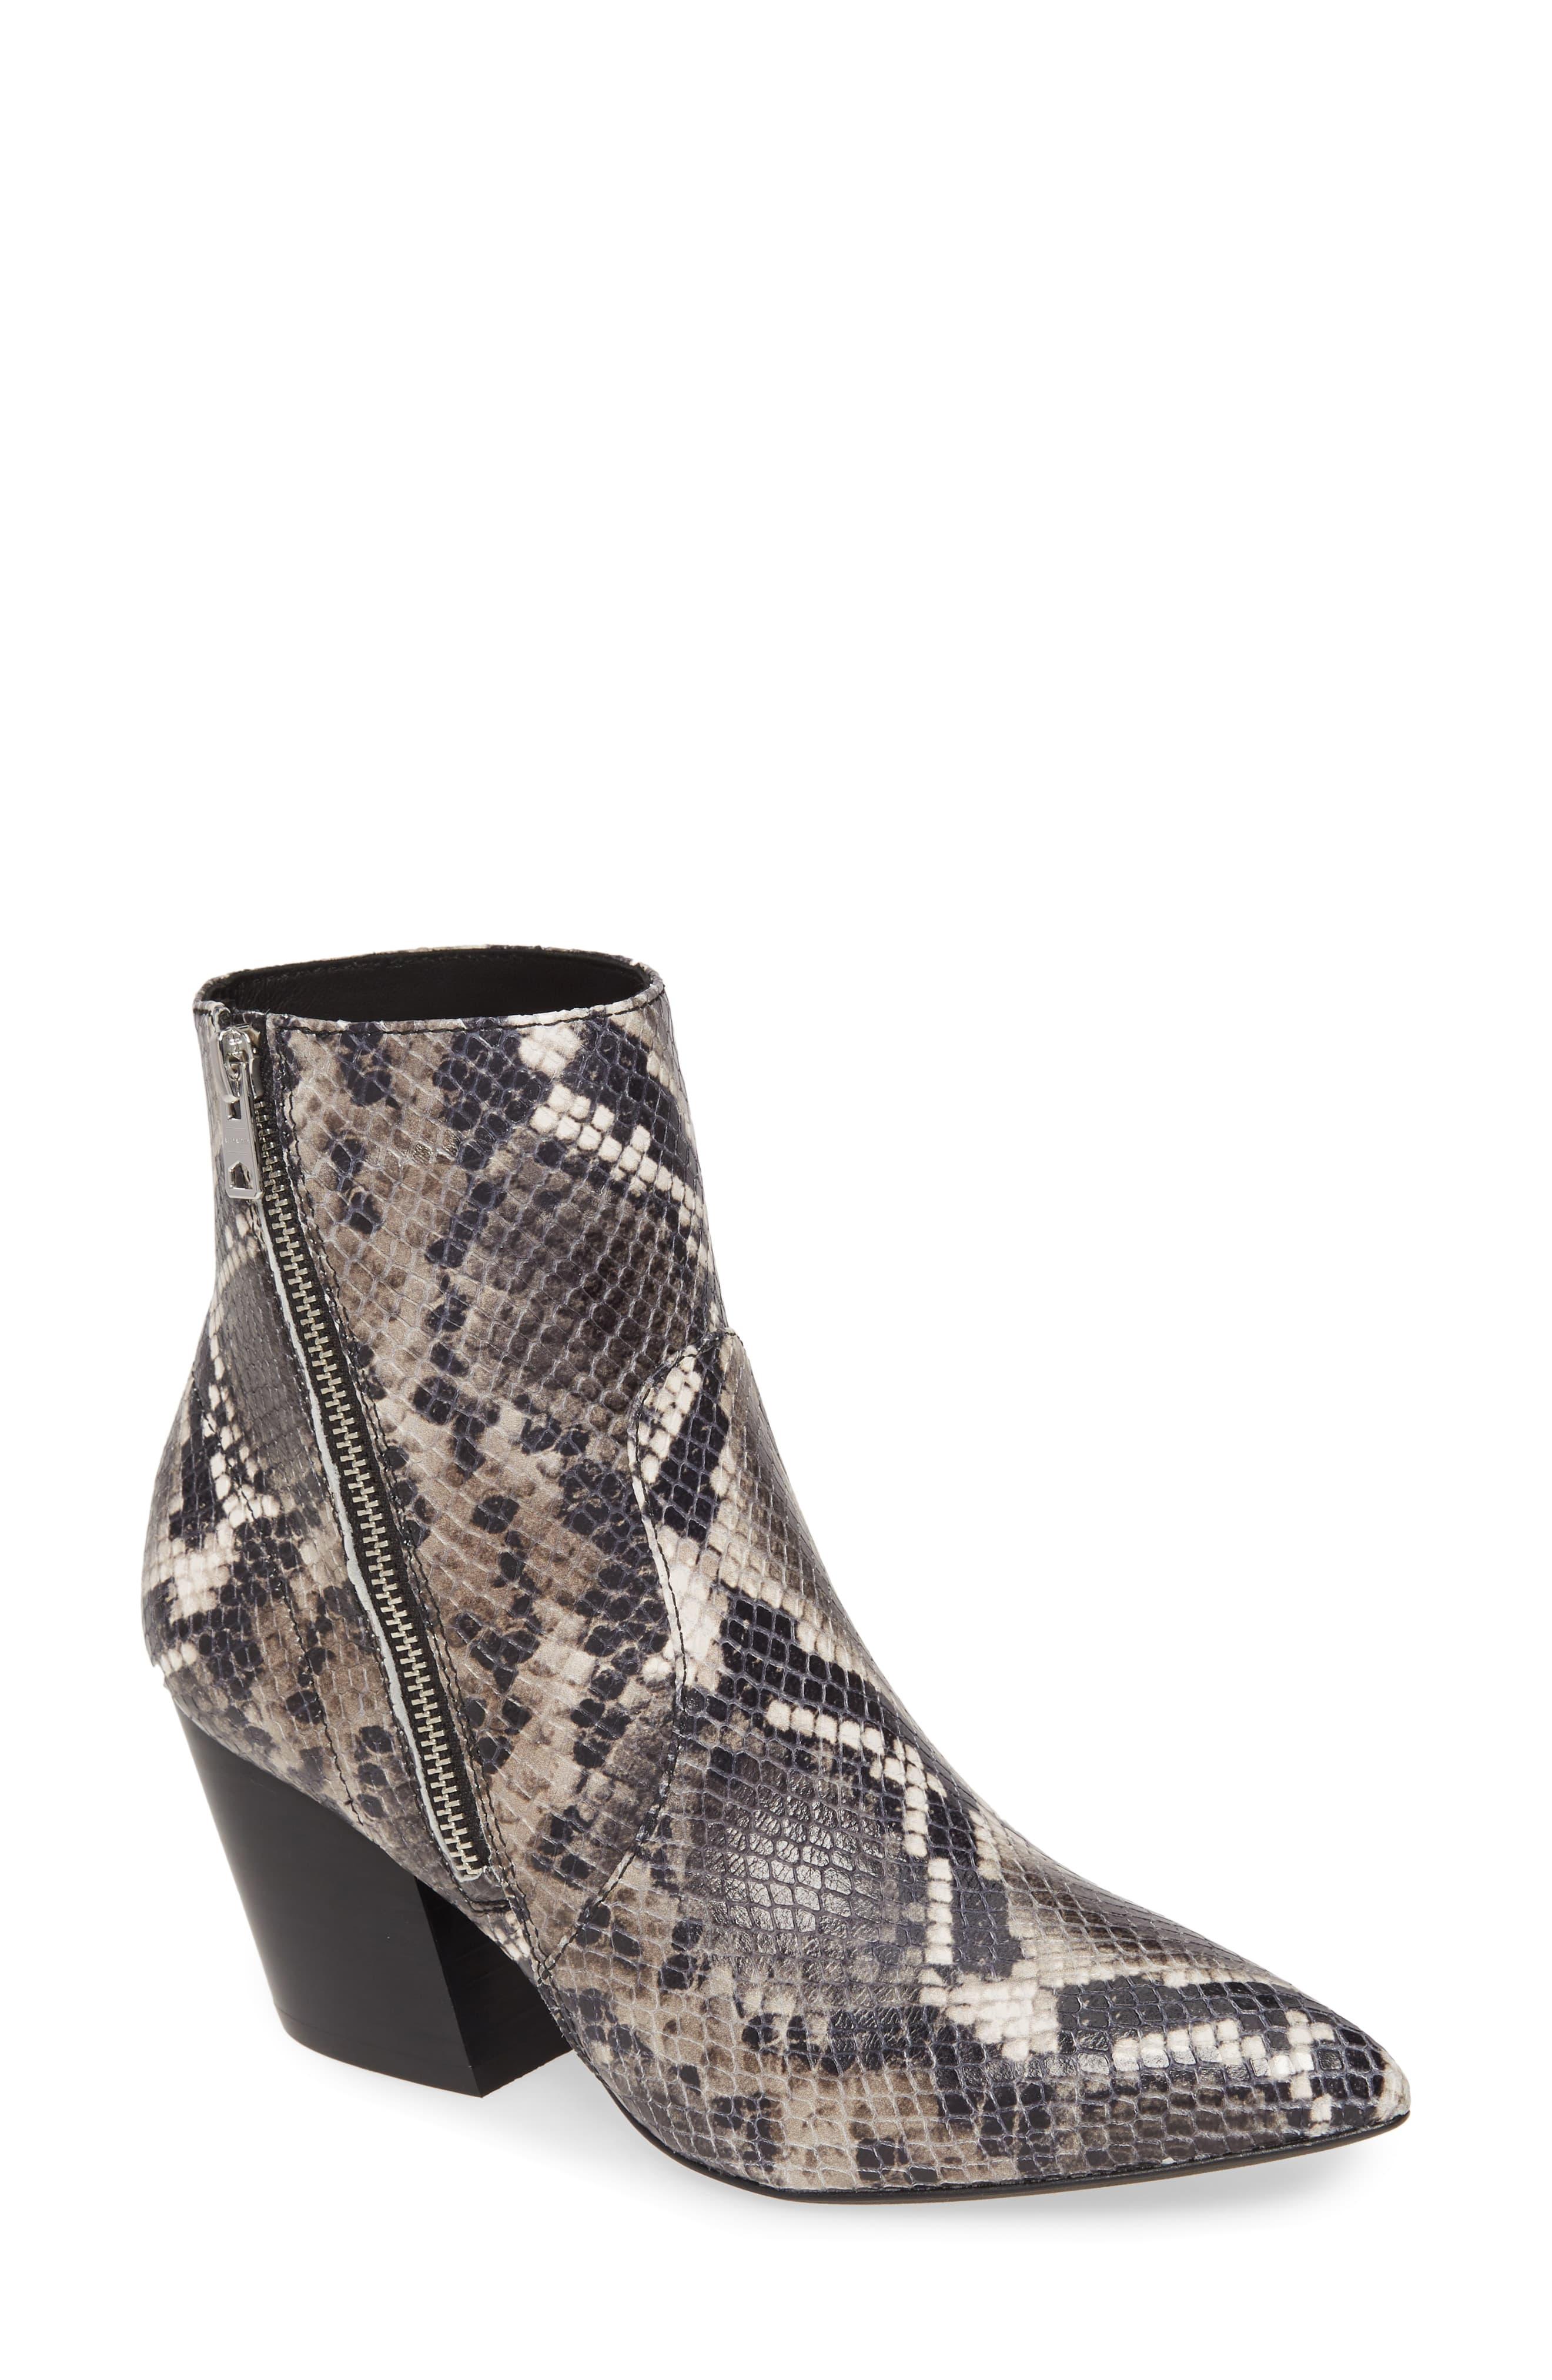 AllSaints Aster Bootie in Black/ White Snake Leather (Black) - Lyst